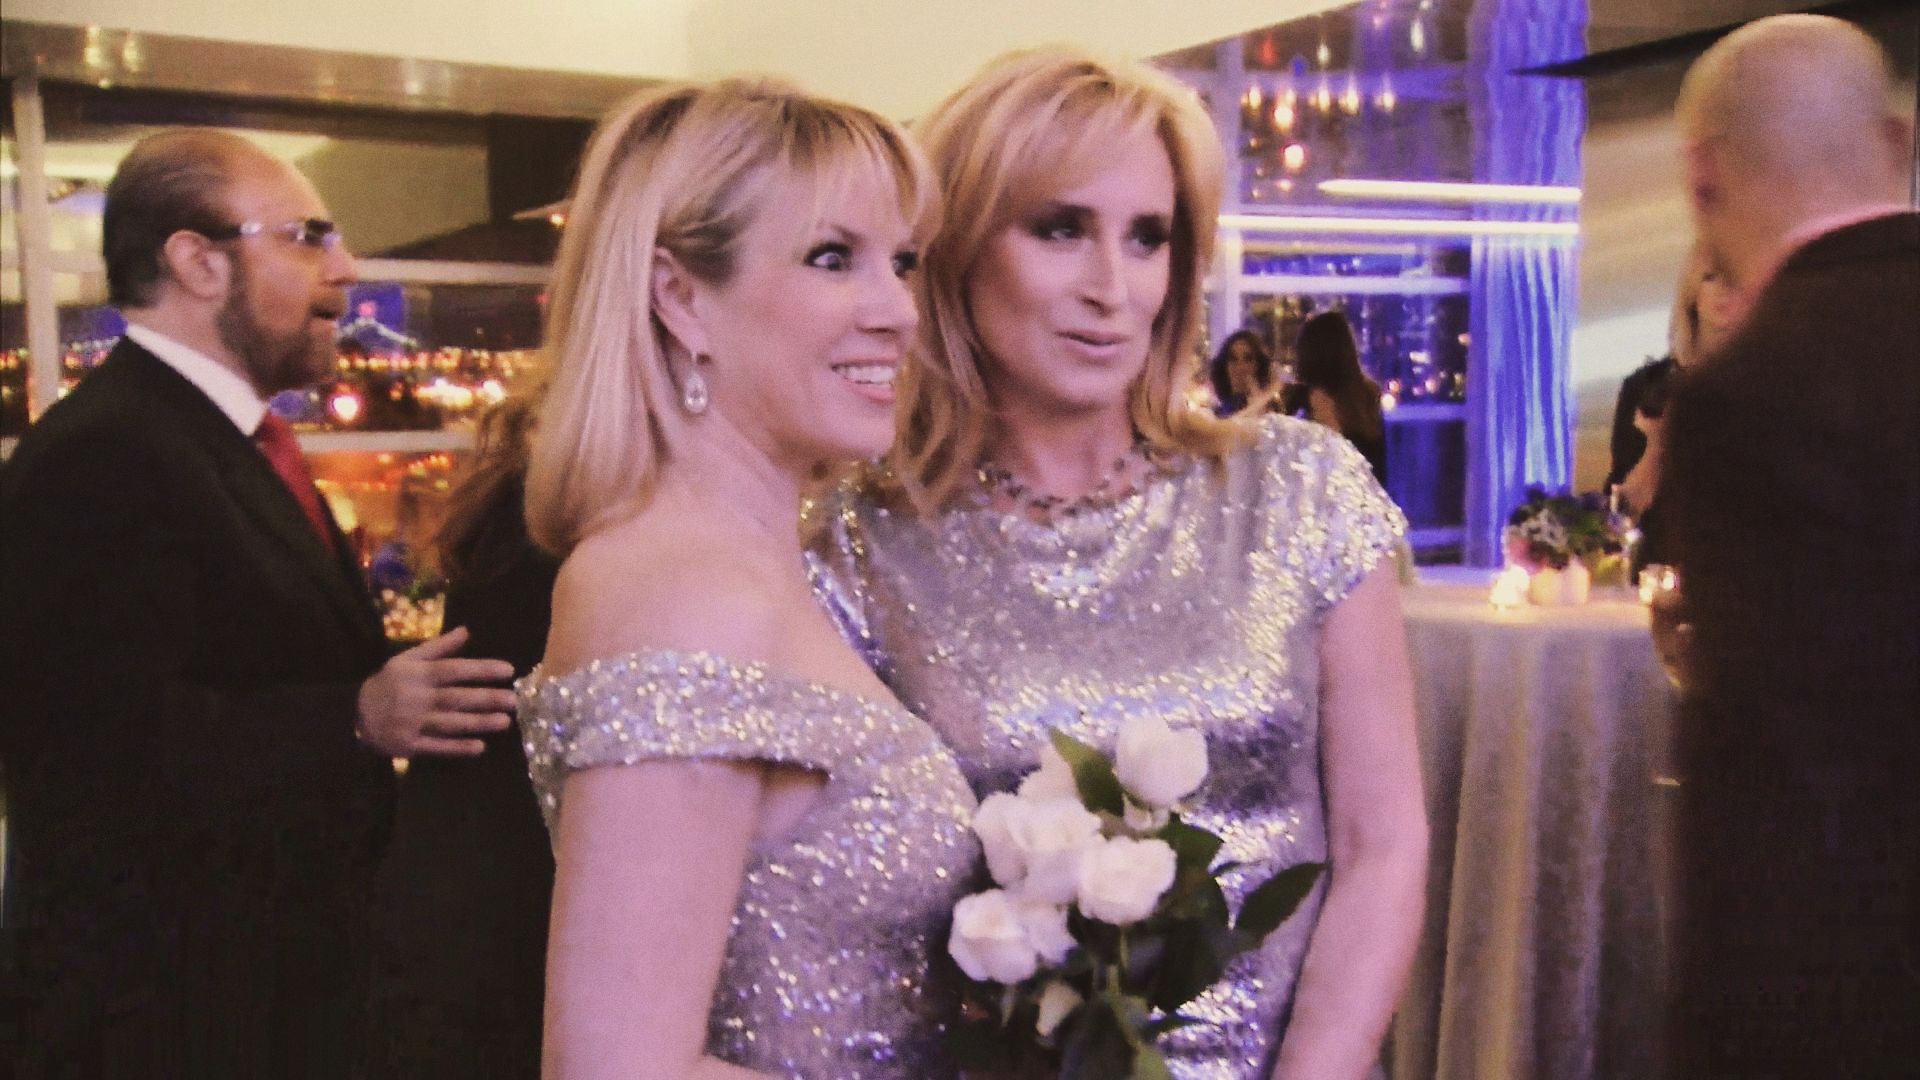 RHONY The Real Housewives of New York City S04E13 saison 4 épisode 13 Your Tweeting Heart